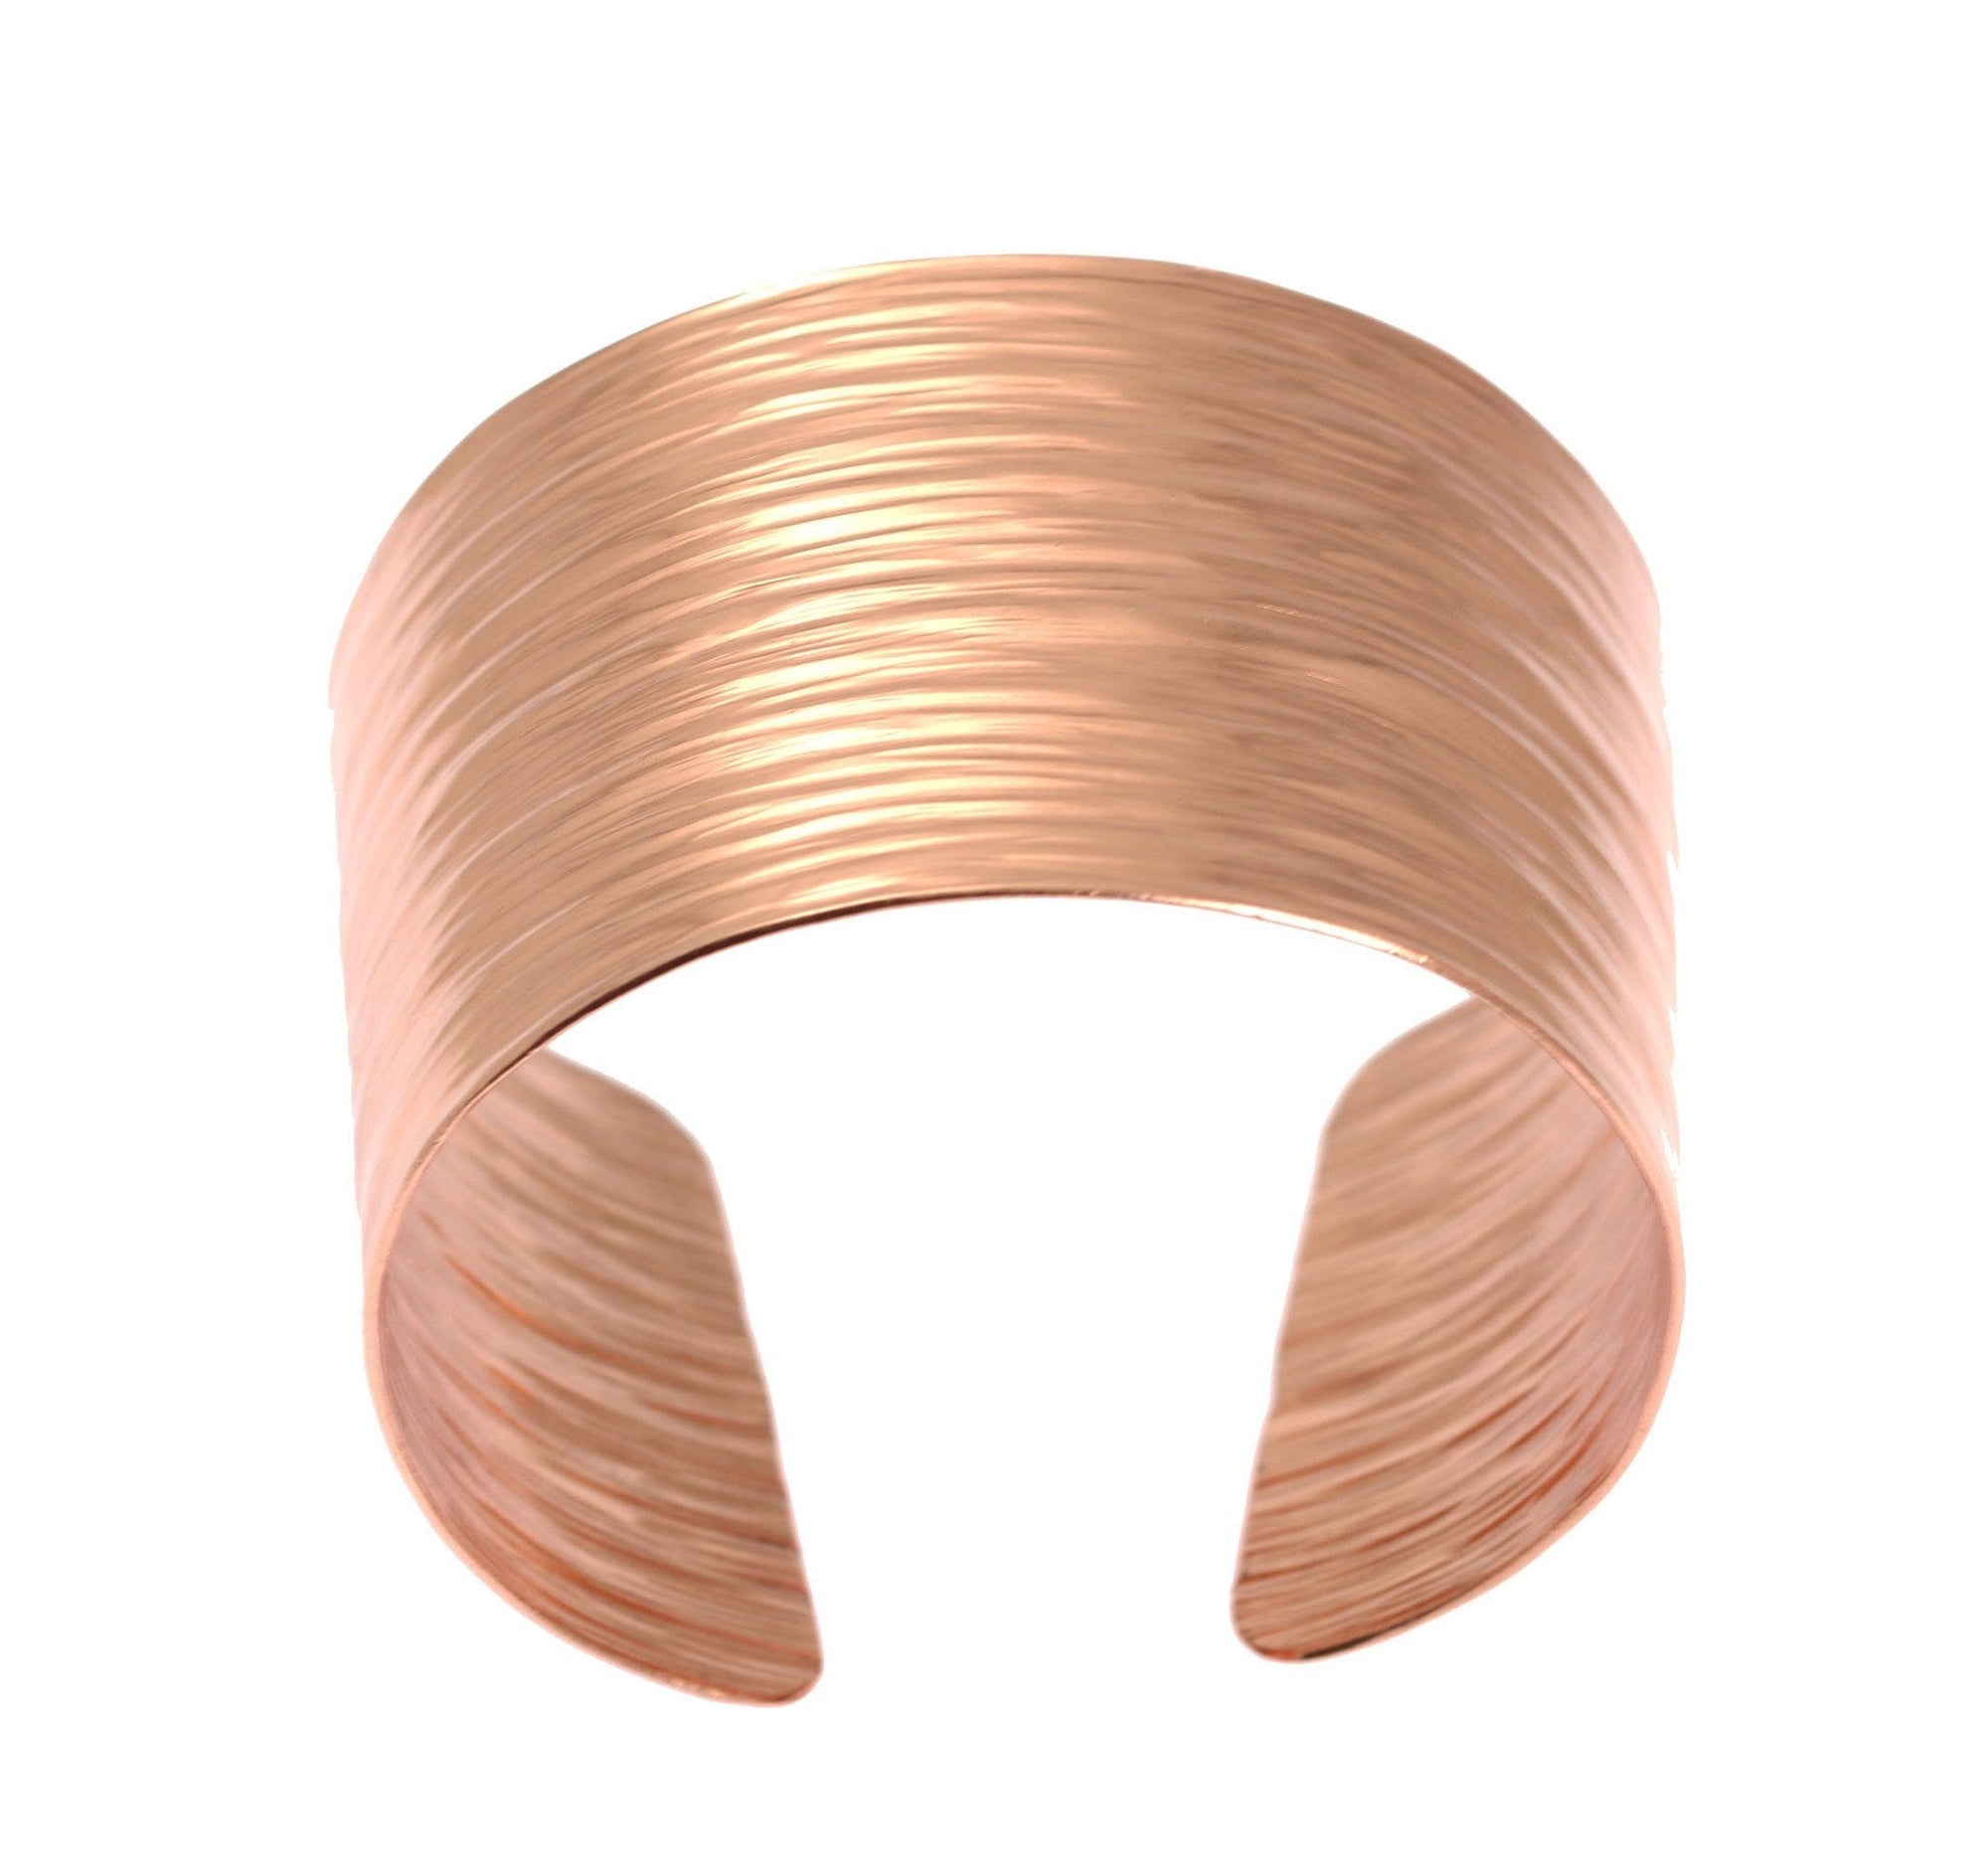 Top View of Chased Copper Bark Cuff Bracelet